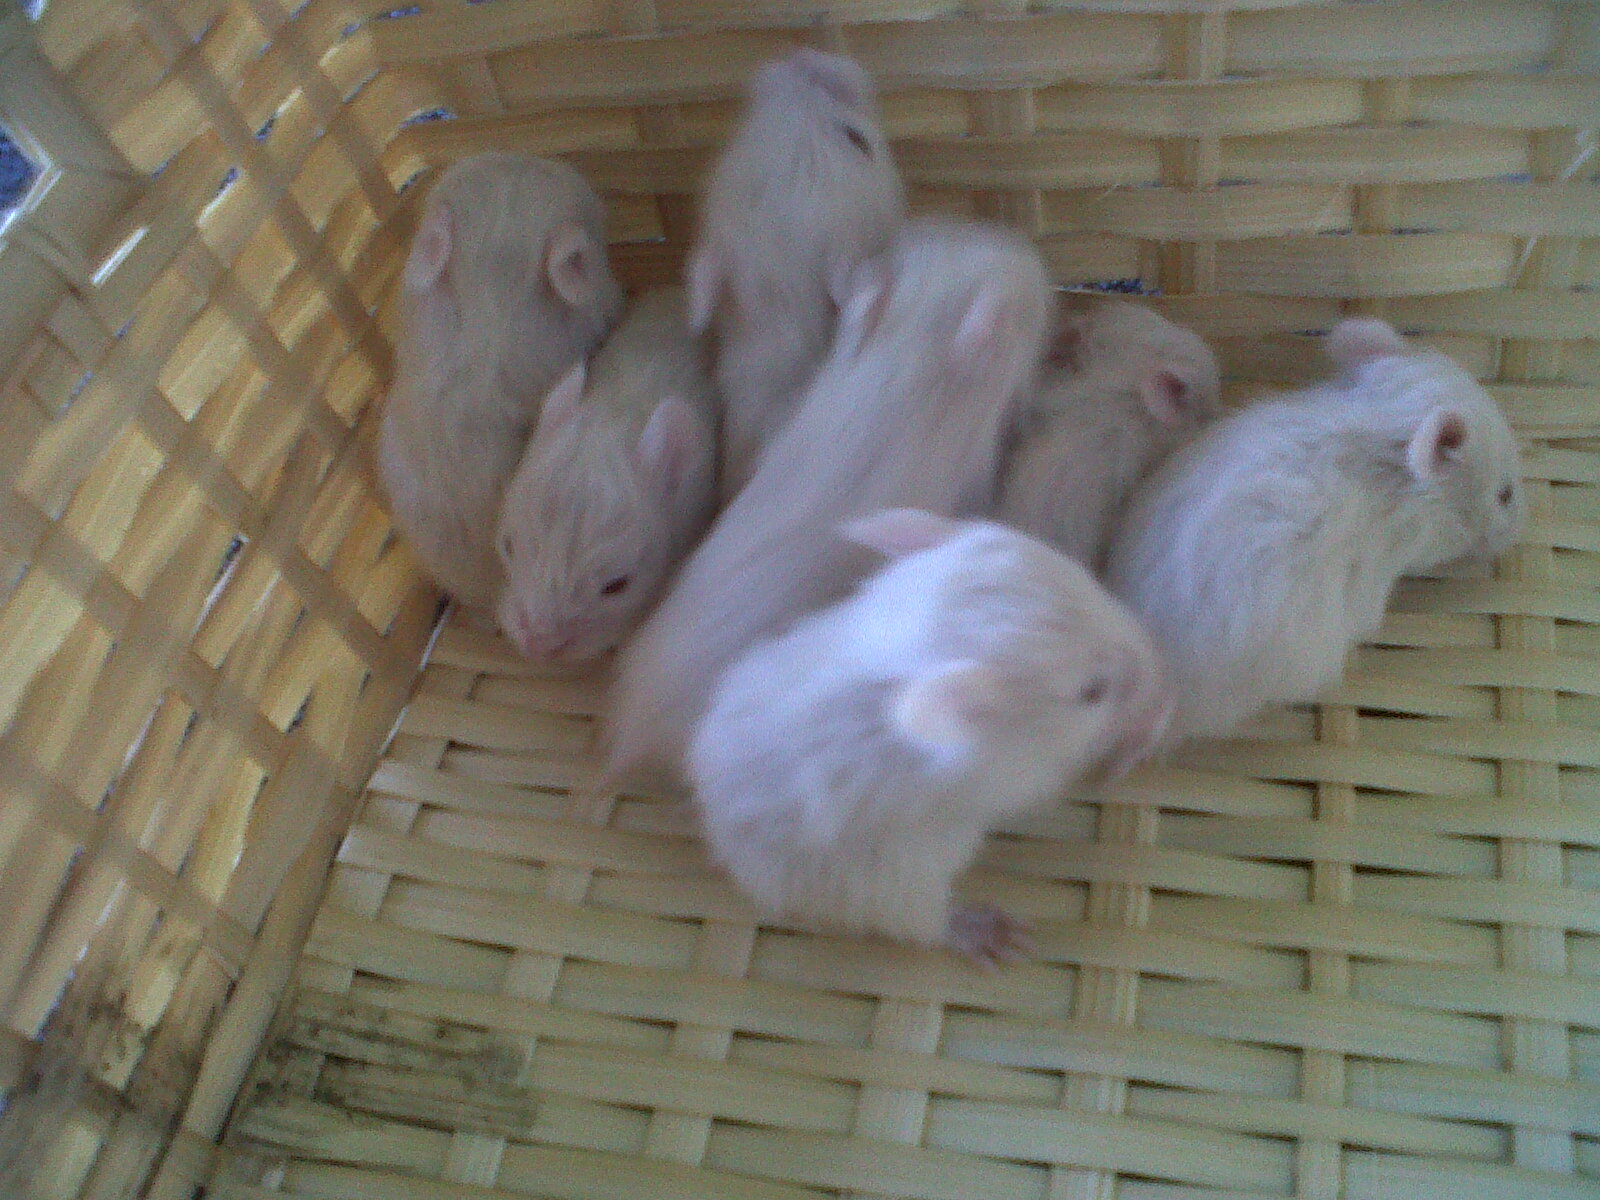 Don d'hamsters